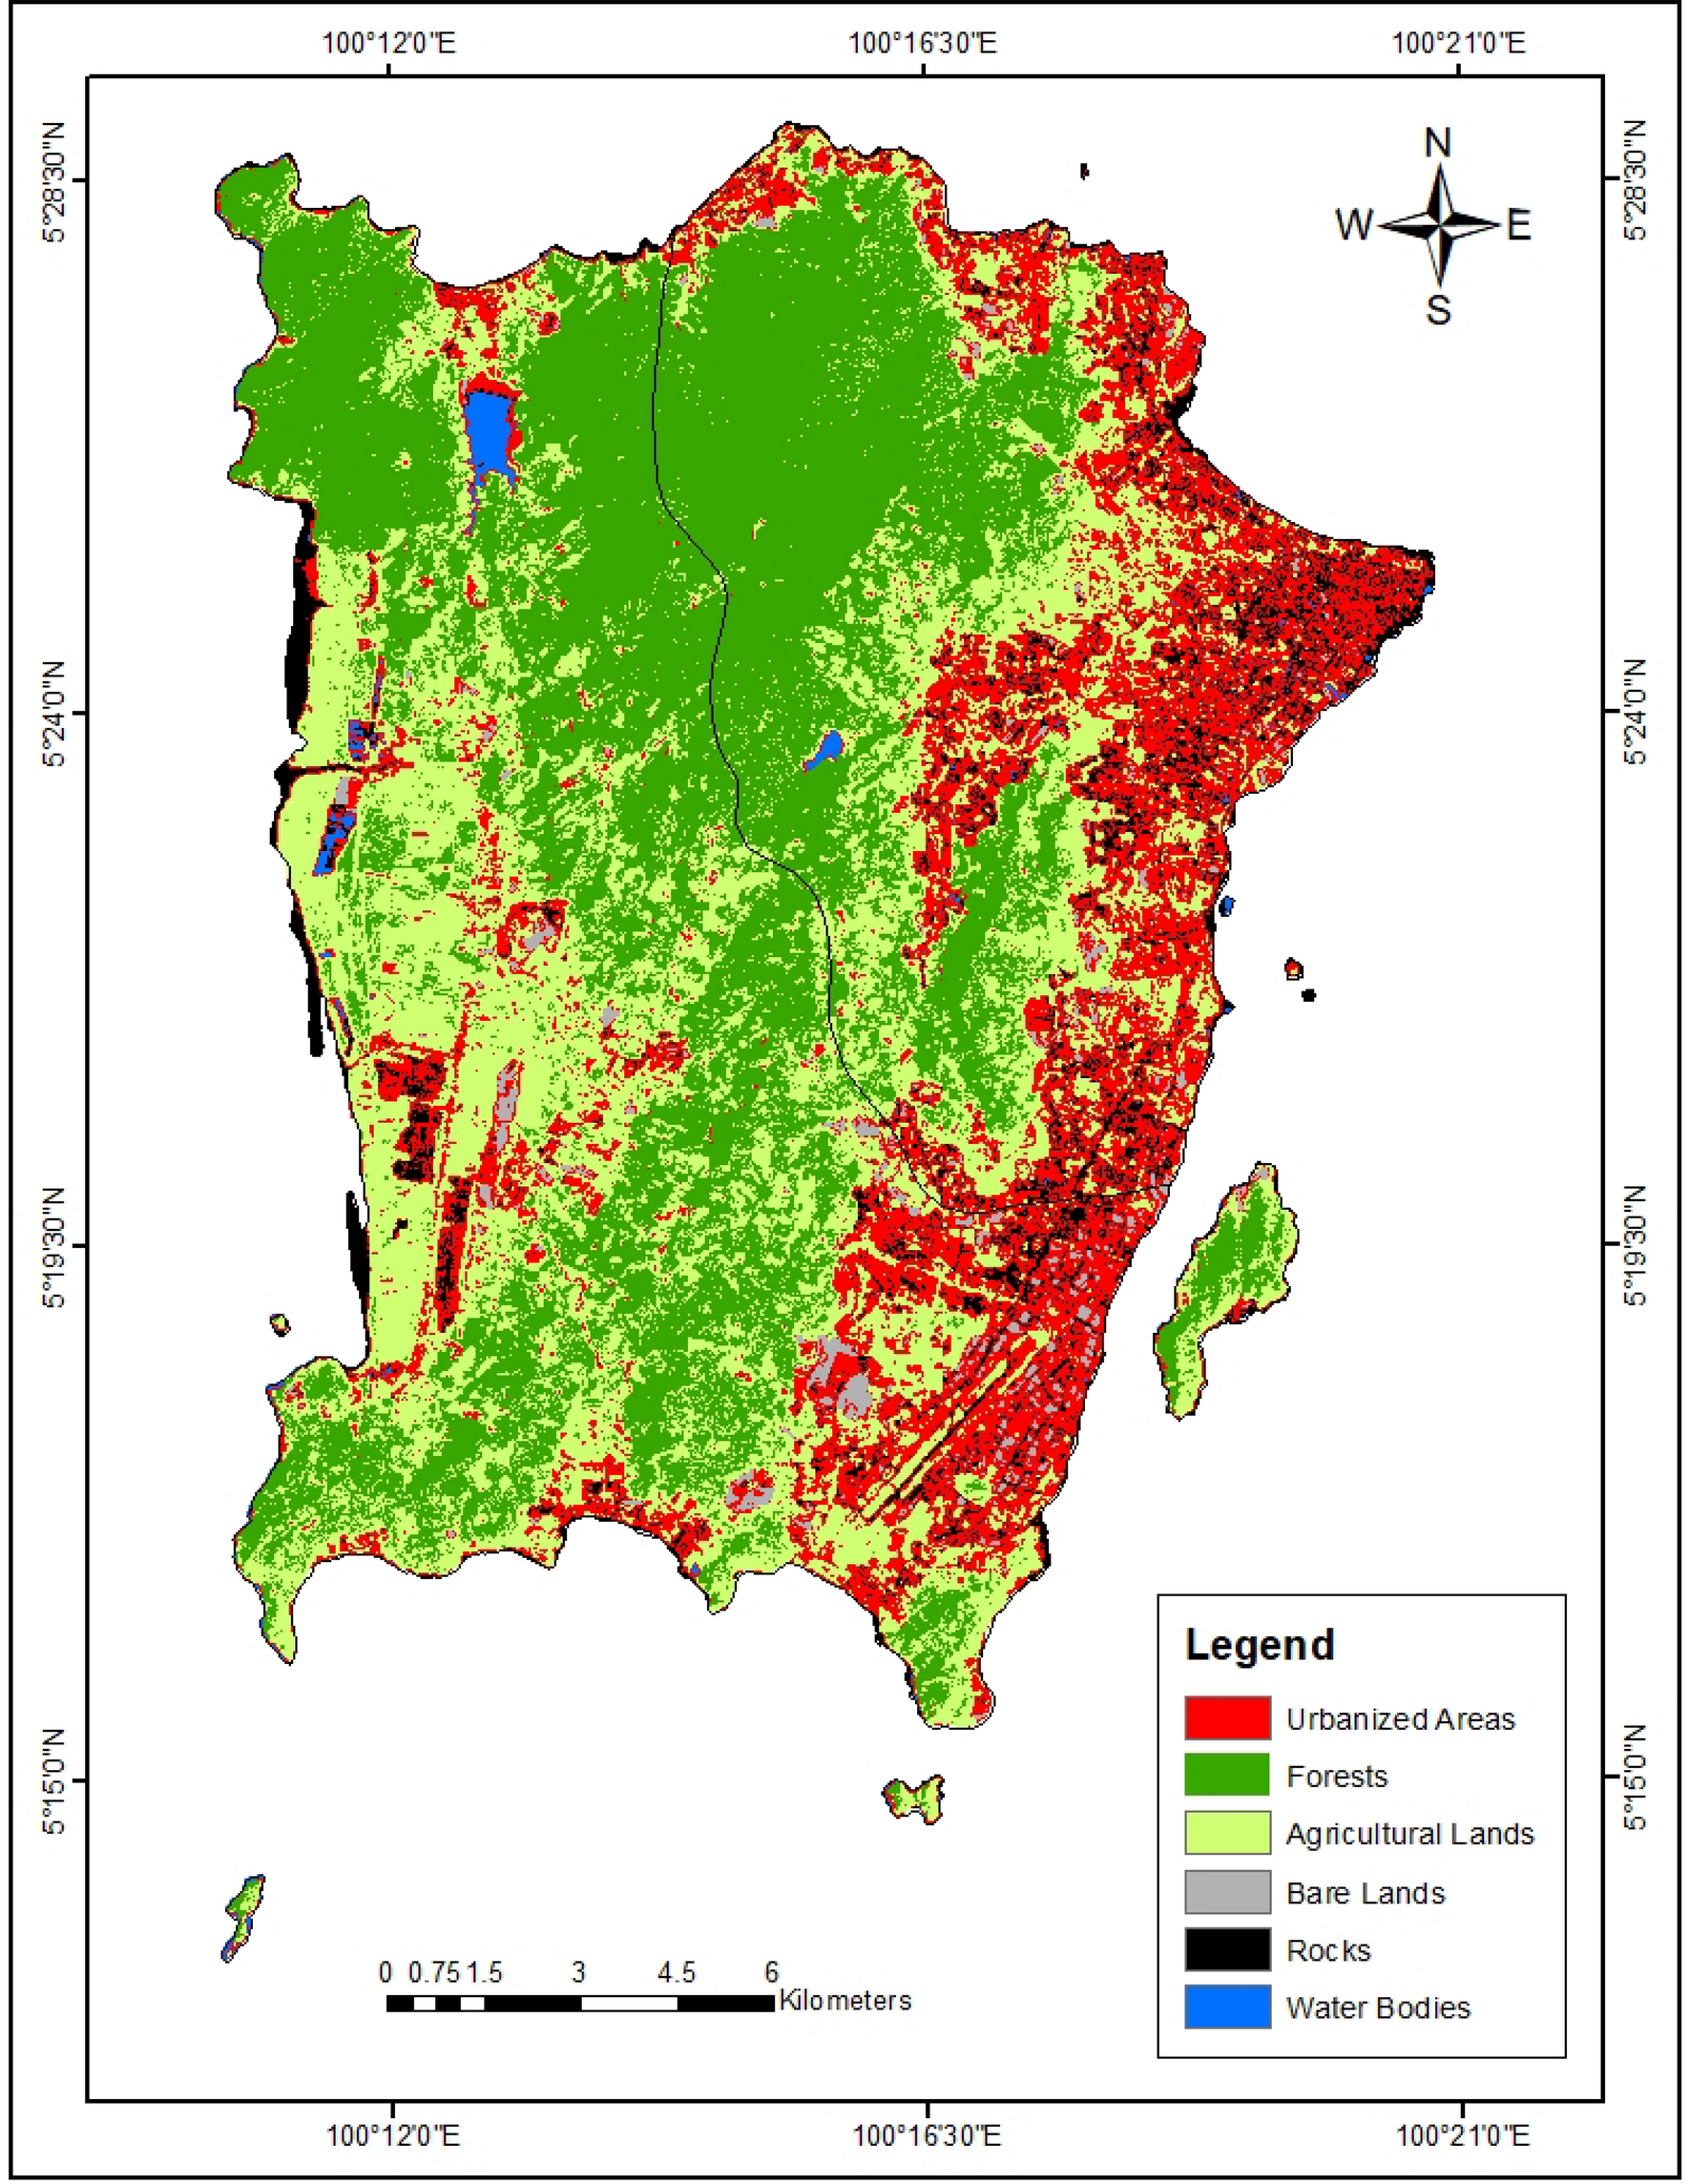 Land use and land cover changes influence the land surface temperature and  vegetation in Penang Island, Peninsular Malaysia | Scientific Reports